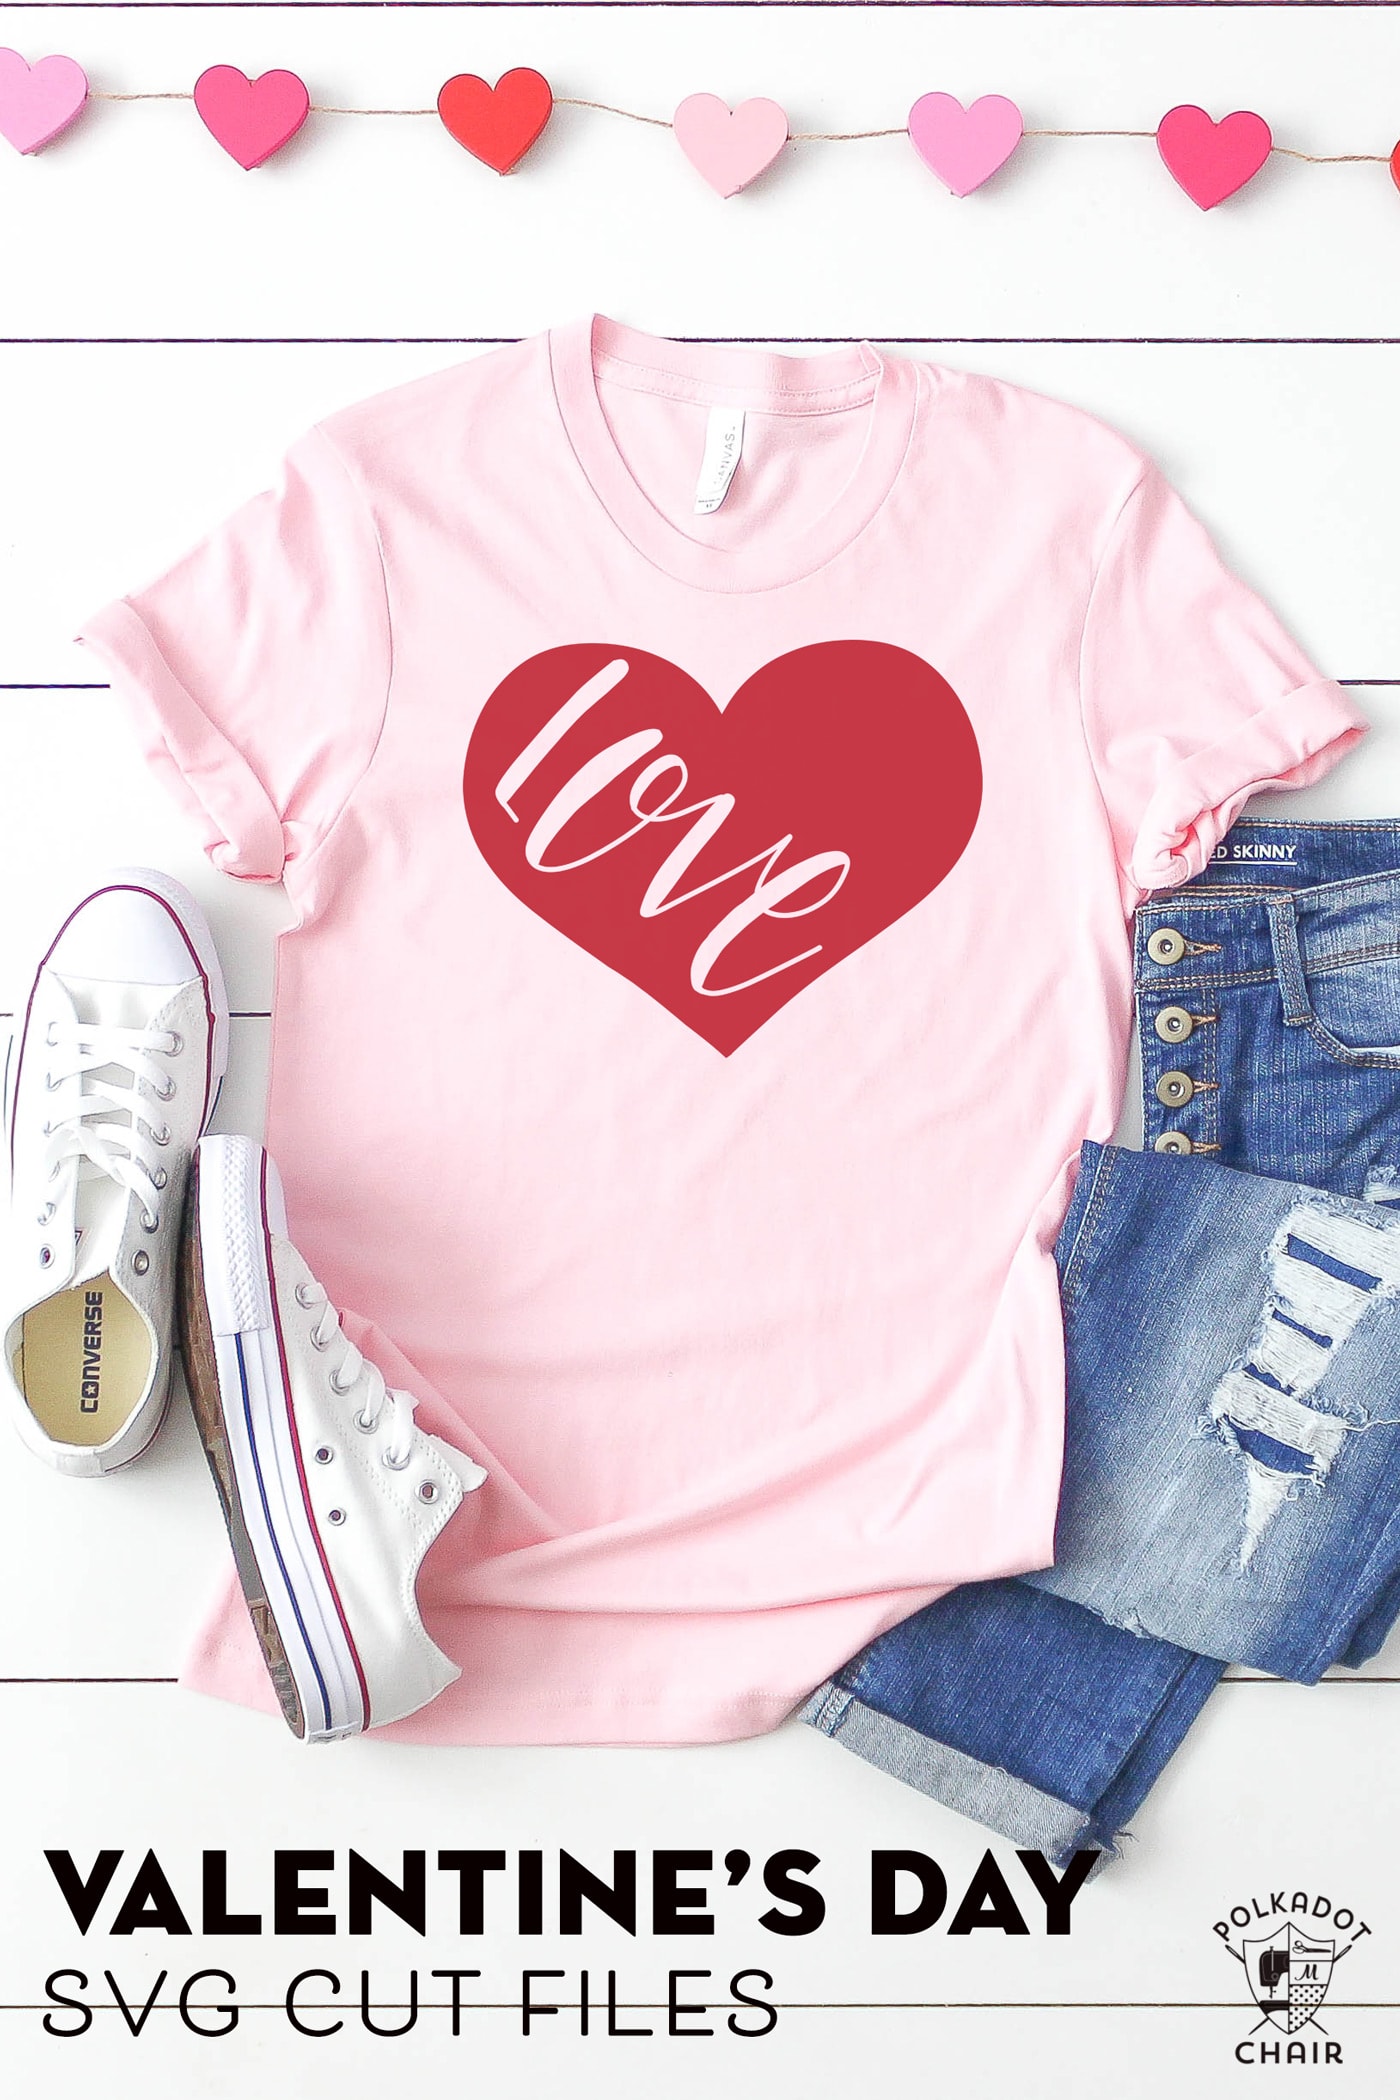 Download Diy Valentine S Day T Shirts And Valentine Svg Files Polka Dot Chair SVG, PNG, EPS, DXF File